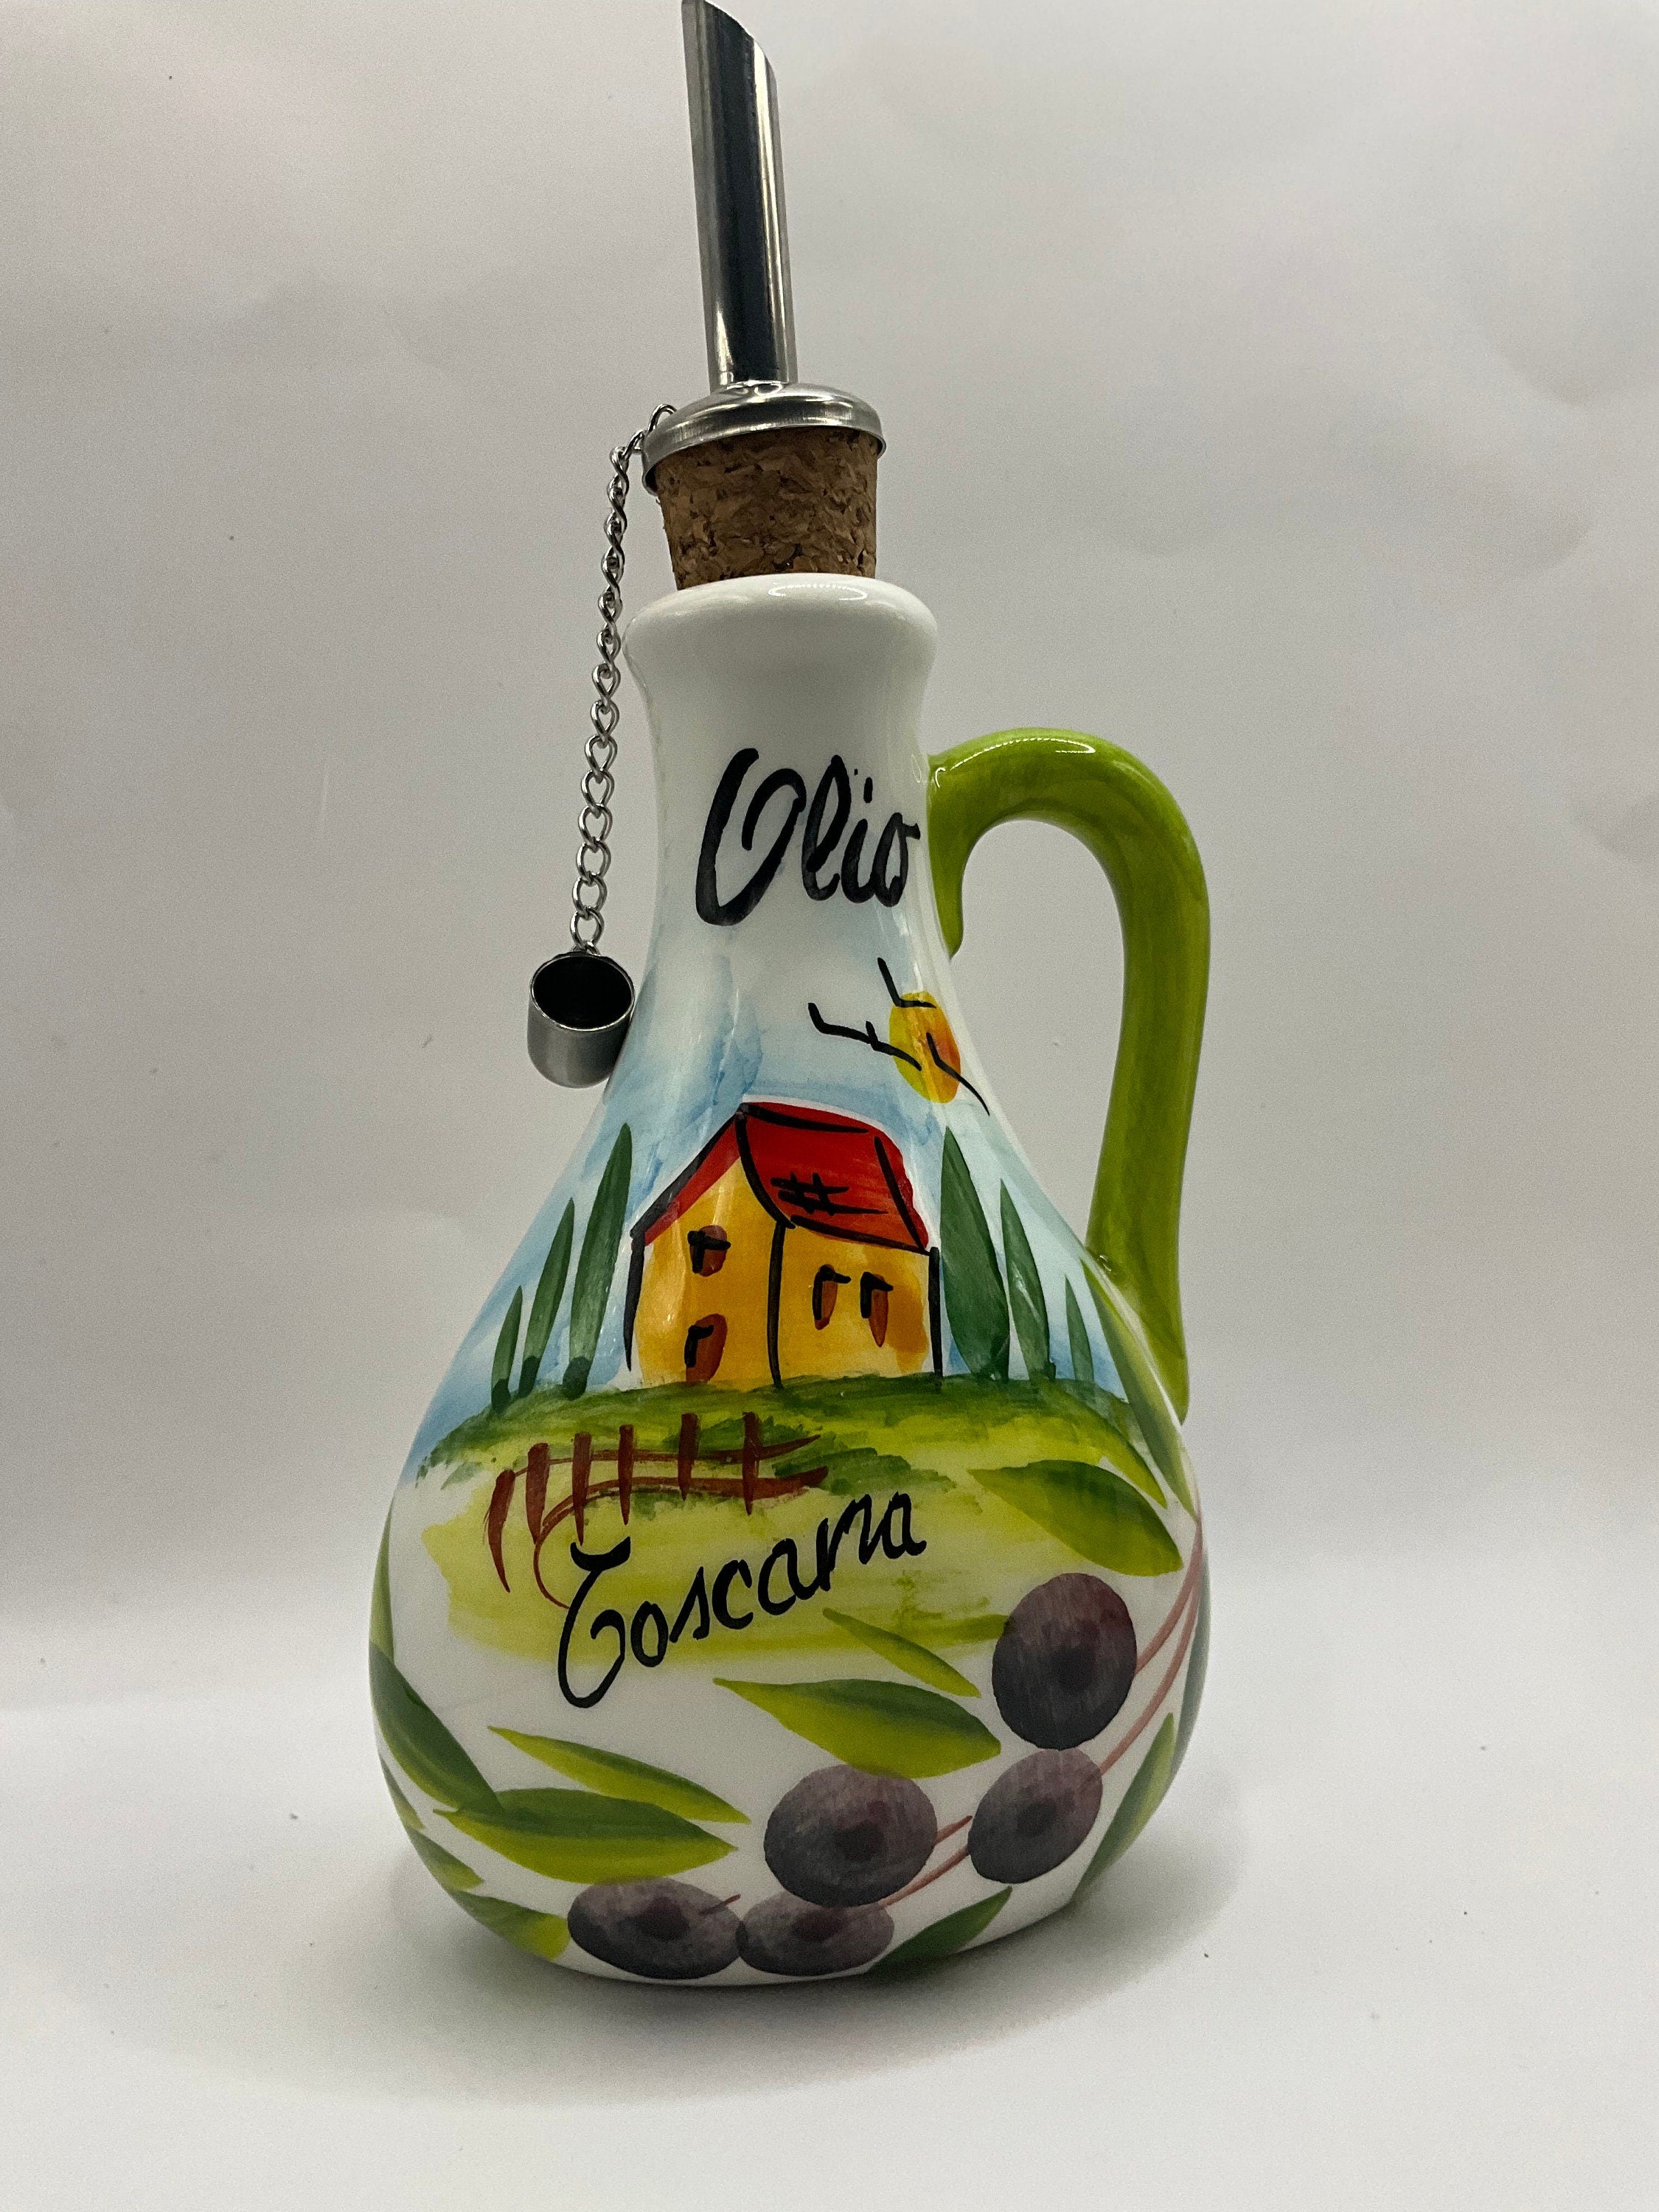 Olive Oil Bottle with Handle for Table